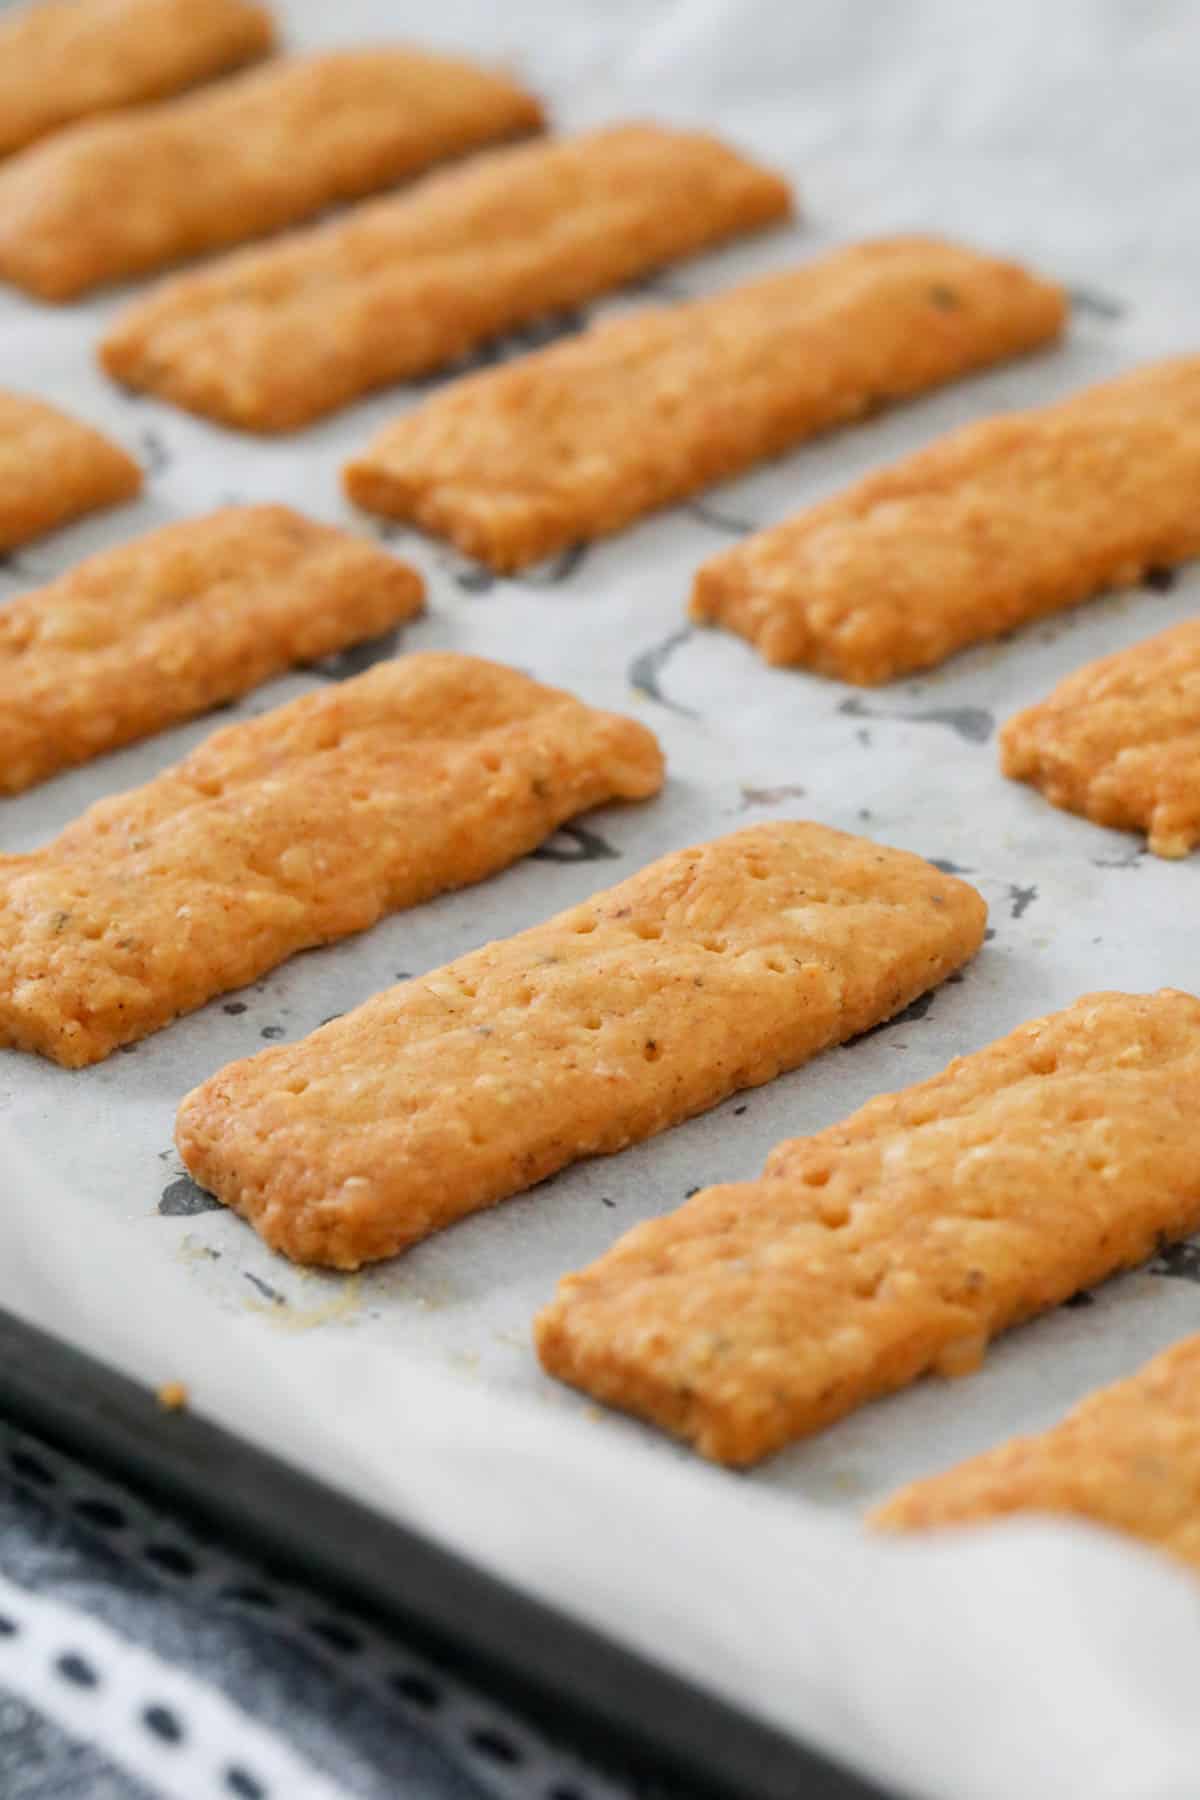 baked cheese sticks on a lined baking tray.